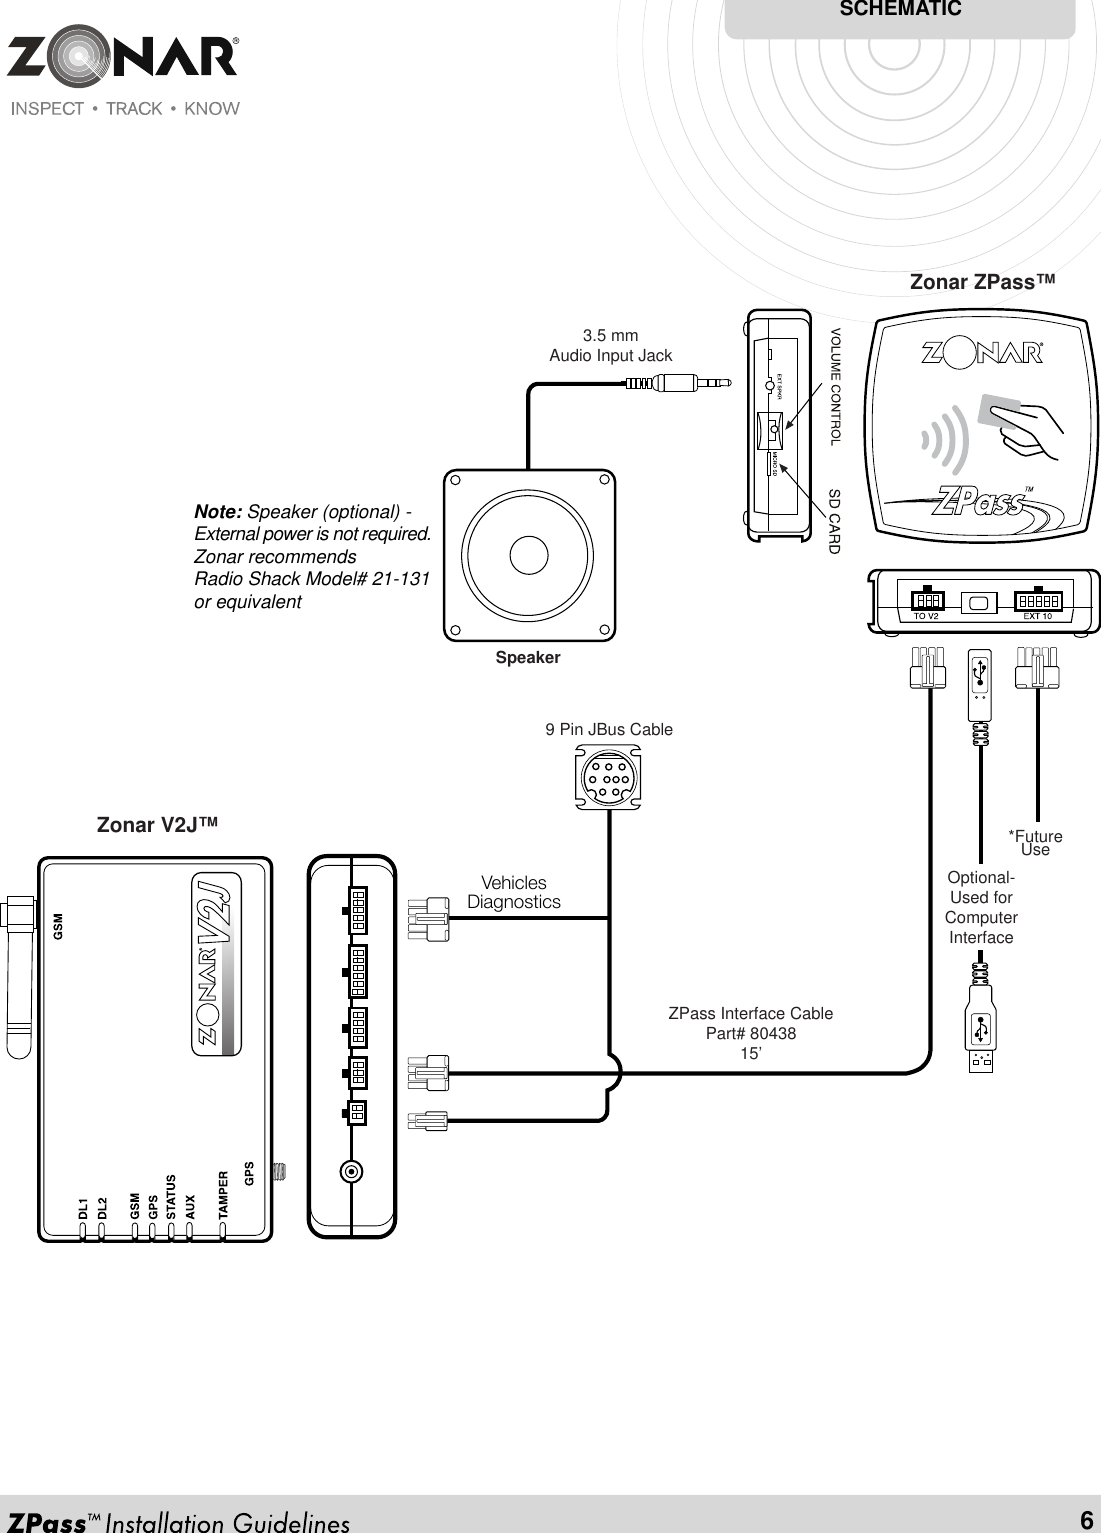 Zonar V2J™SCHEMATIC6Zonar ZPass™Note: Speaker (optional) -External power is not required.Zonar recommendsRadio Shack Model# 21-131or equivalentSpeaker3.5 mmAudio Input JackZPass Interface CablePart# 8043815’Optional-Used forComputerInterface*FutureUse9 Pin JBus CableVehiclesDiagnostics